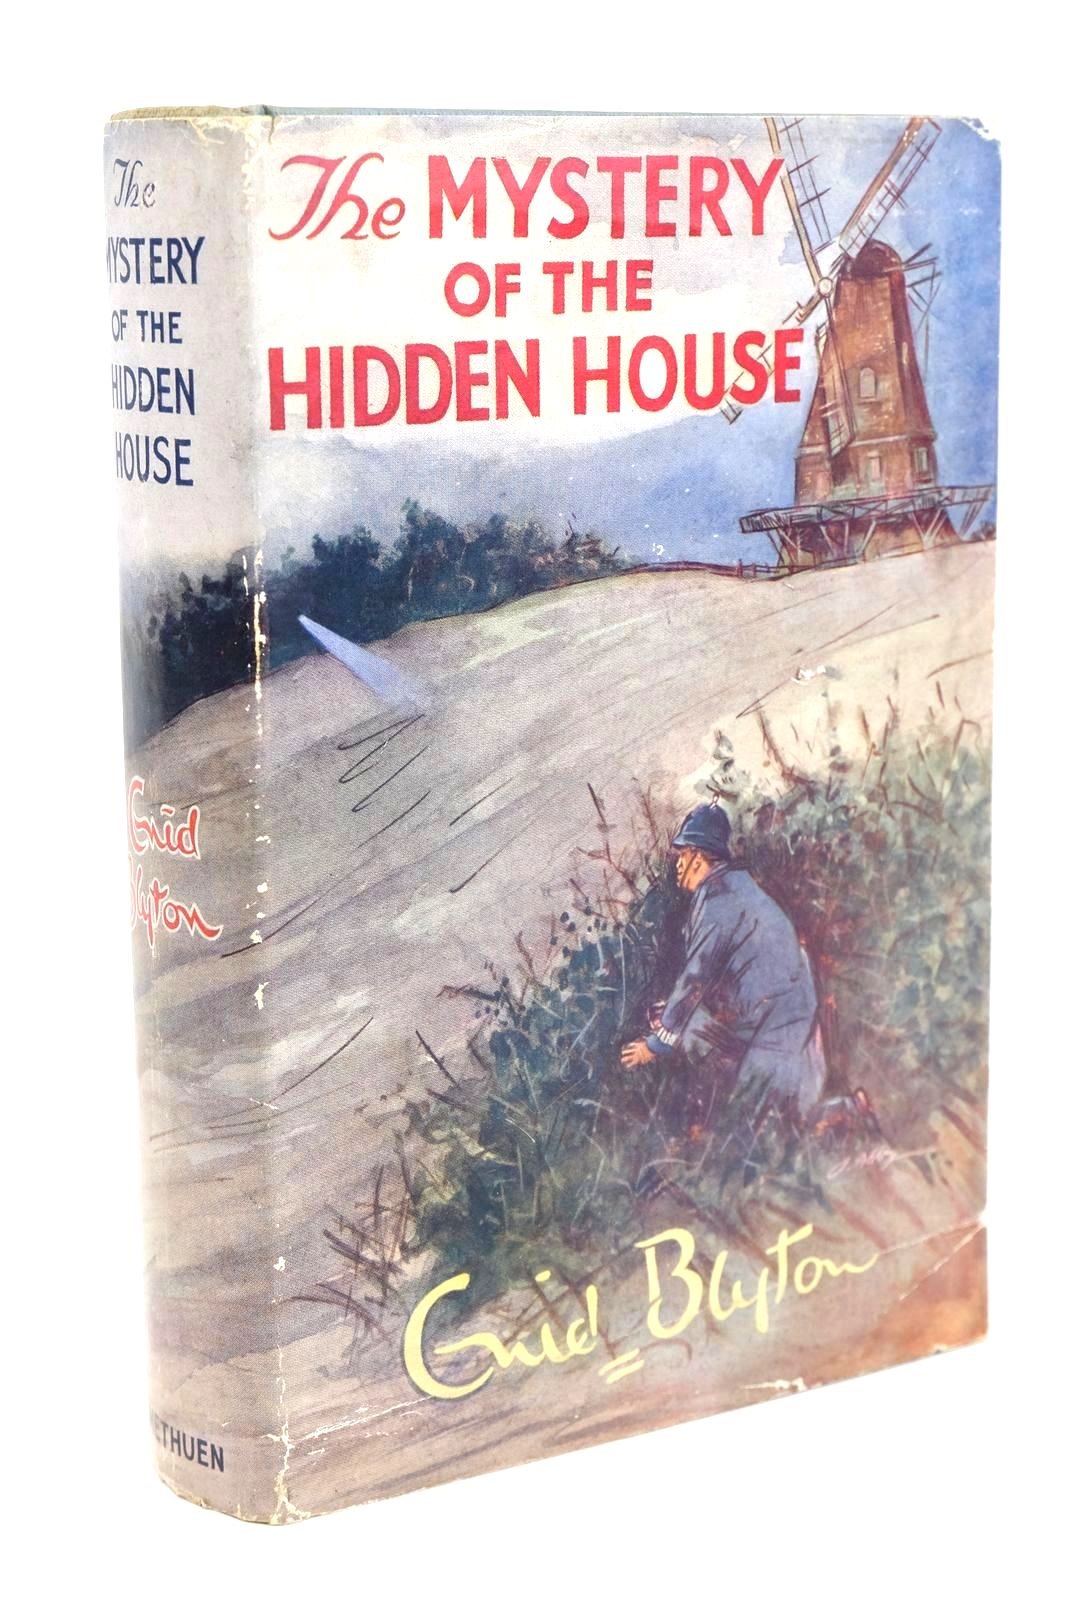 Photo of THE MYSTERY OF THE HIDDEN HOUSE written by Blyton, Enid illustrated by Abbey, J. published by Methuen &amp; Co. Ltd. (STOCK CODE: 1326913)  for sale by Stella & Rose's Books